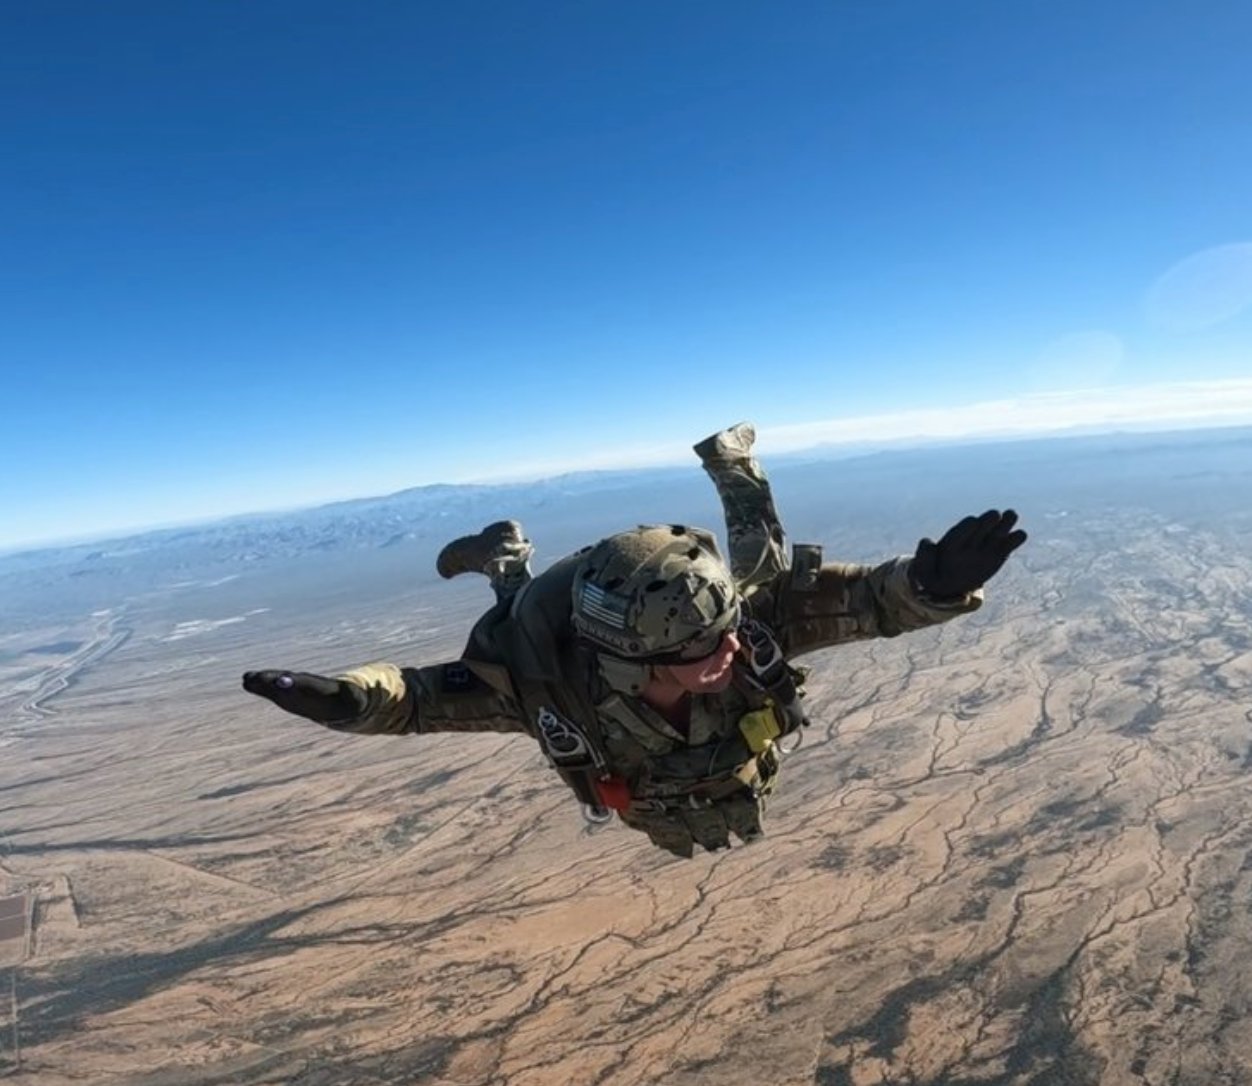 Ryan Webb during his U.S. Air Force pararescue jumper training in the American Southwest.